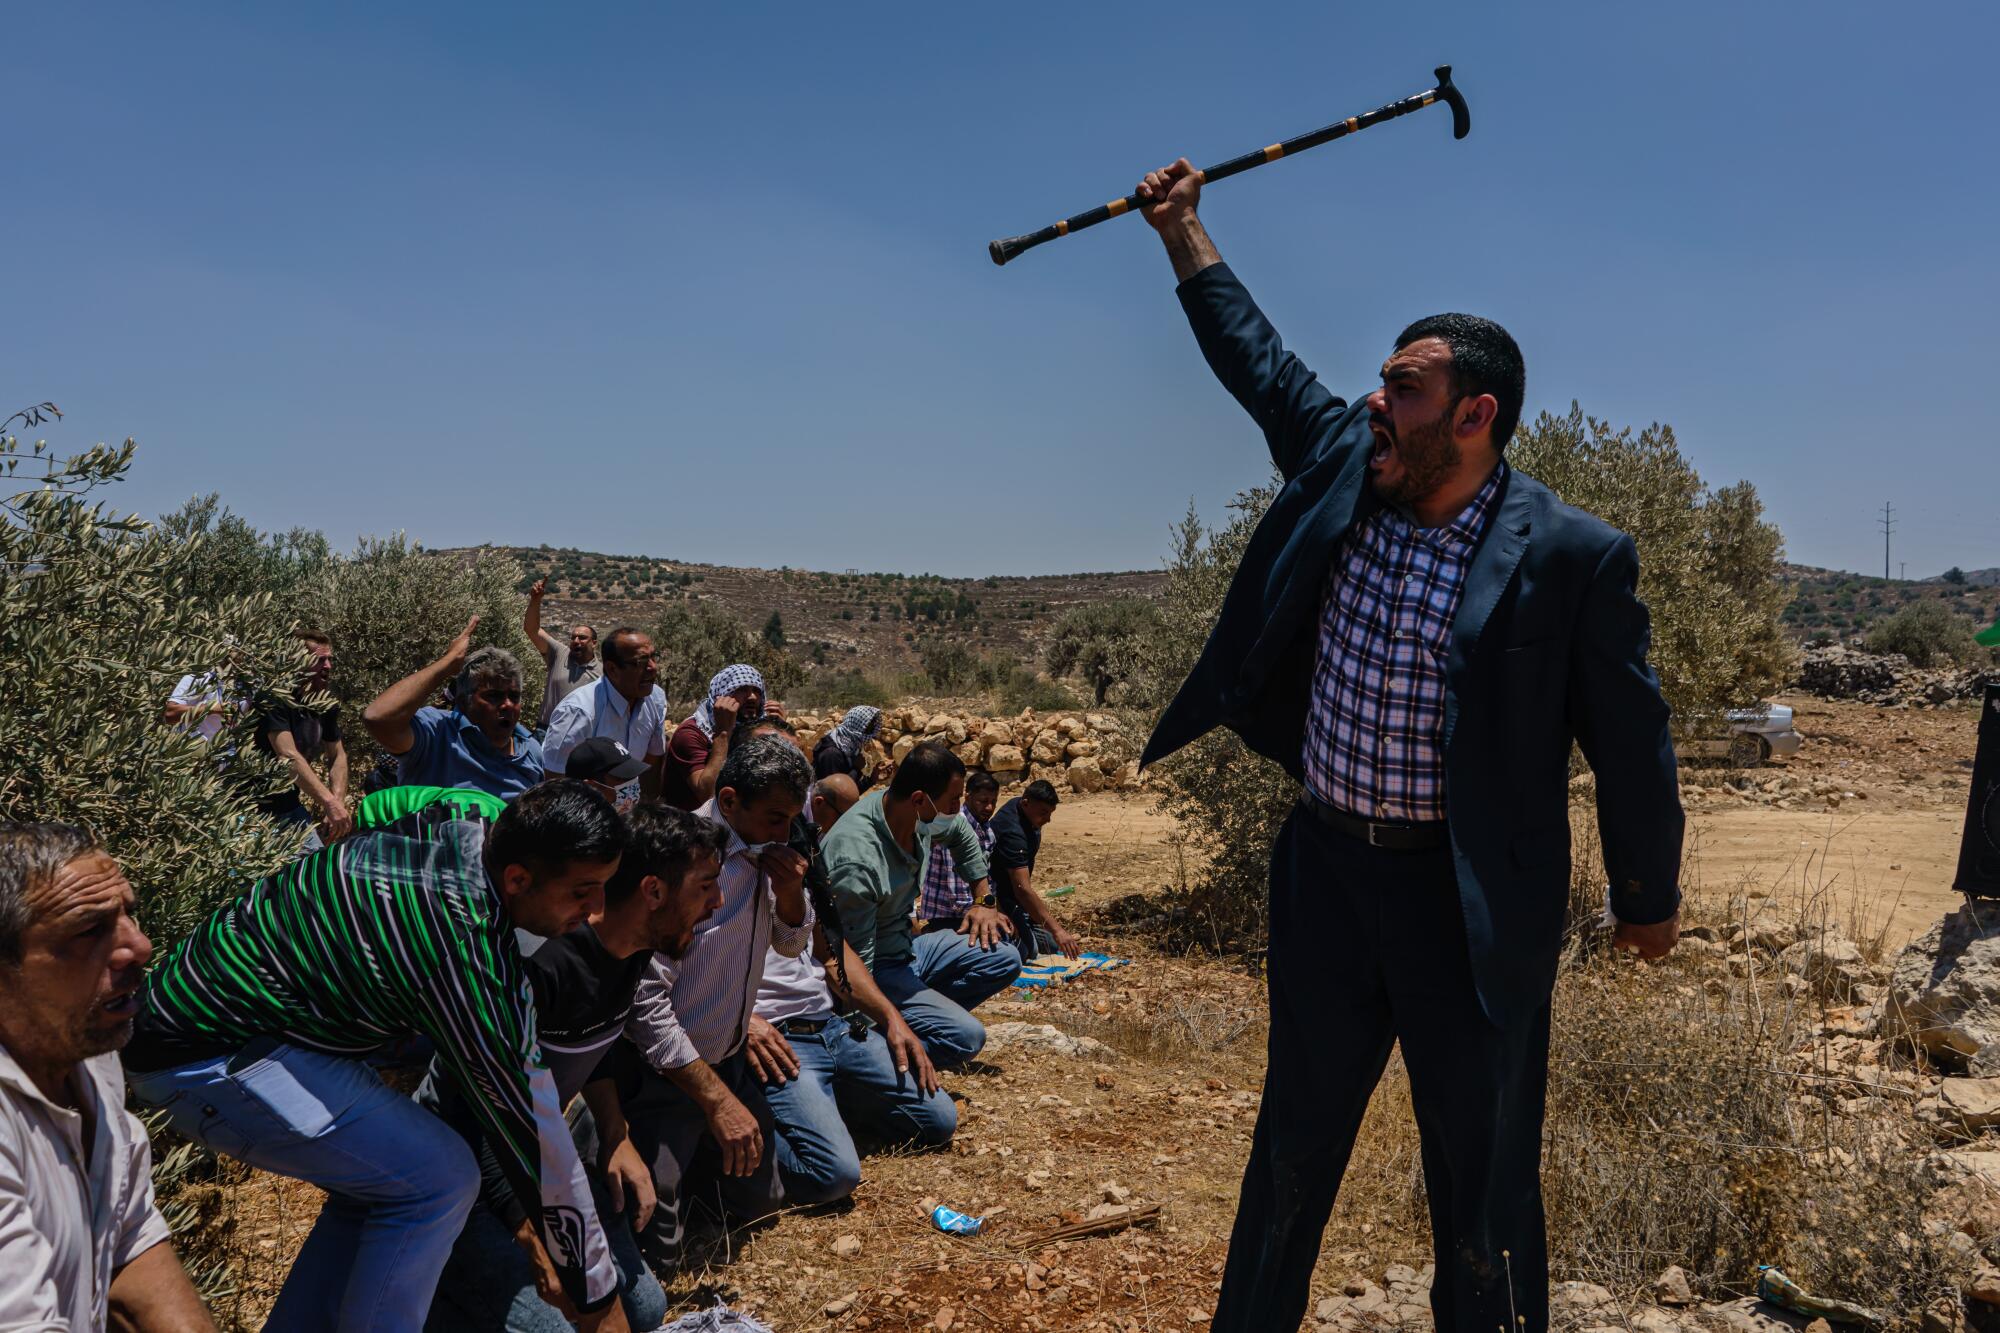 A Palestinian man leading the Friday prayers raises his walking stick in a call to arms after they were tear gassed.